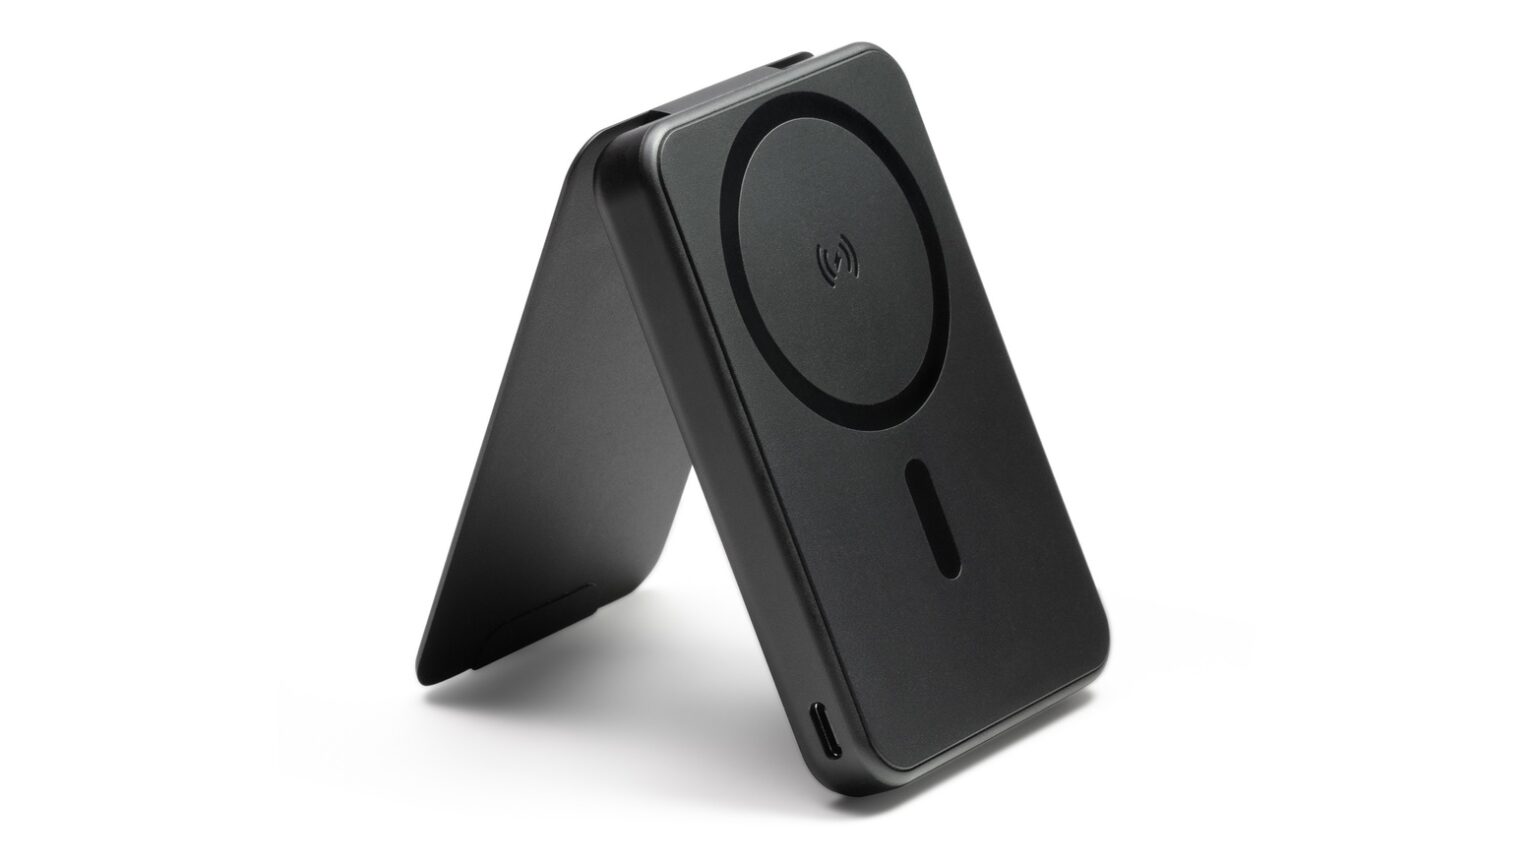 mophie snap+ juice pack mini with stand